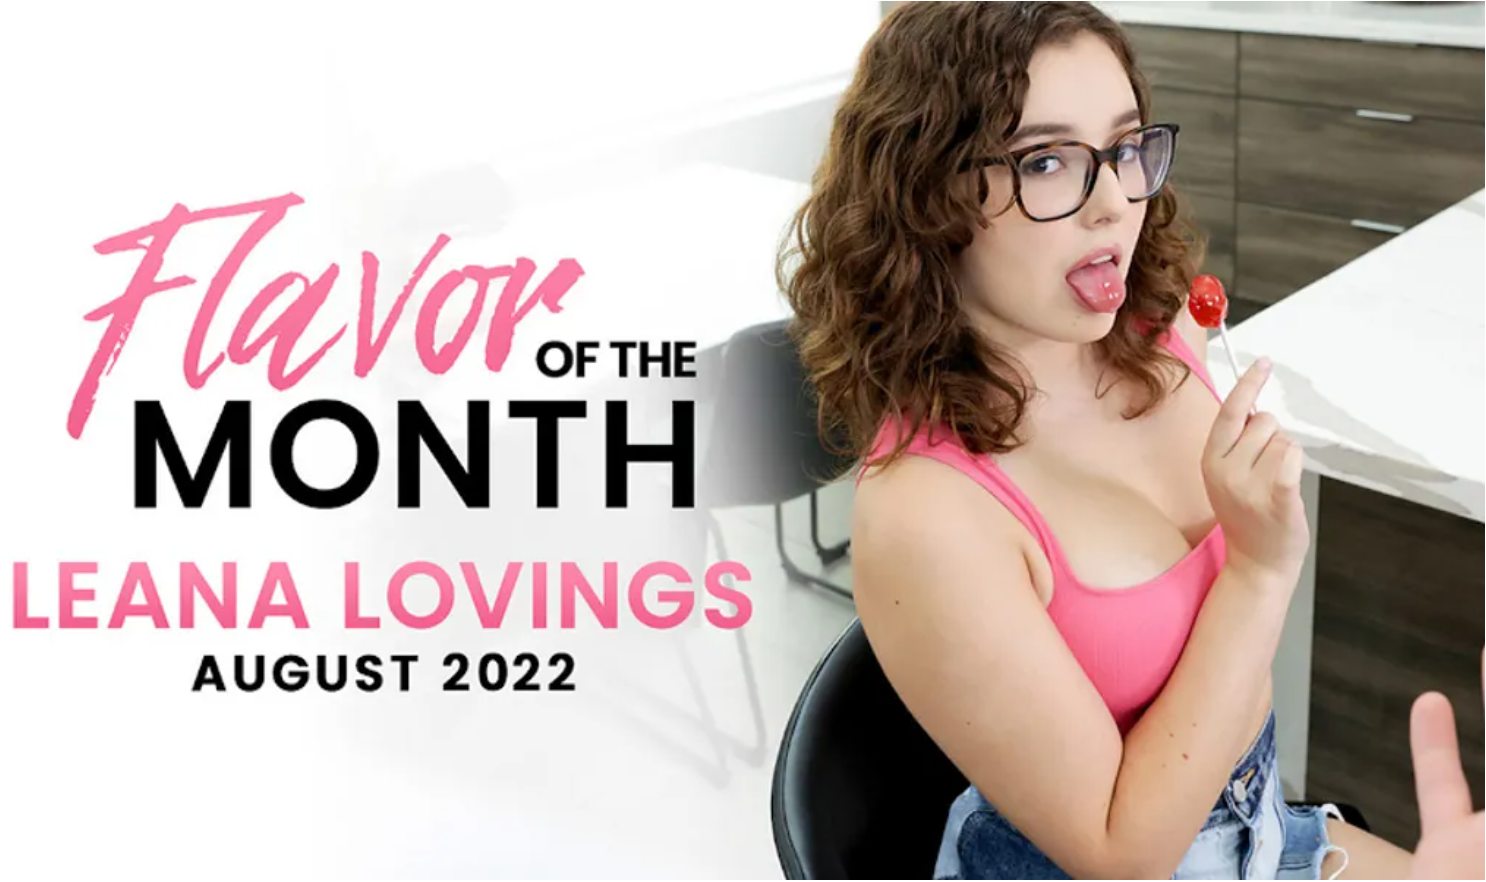 Leana Lovings Named Nubile Films Flavour of the Month for August 2022